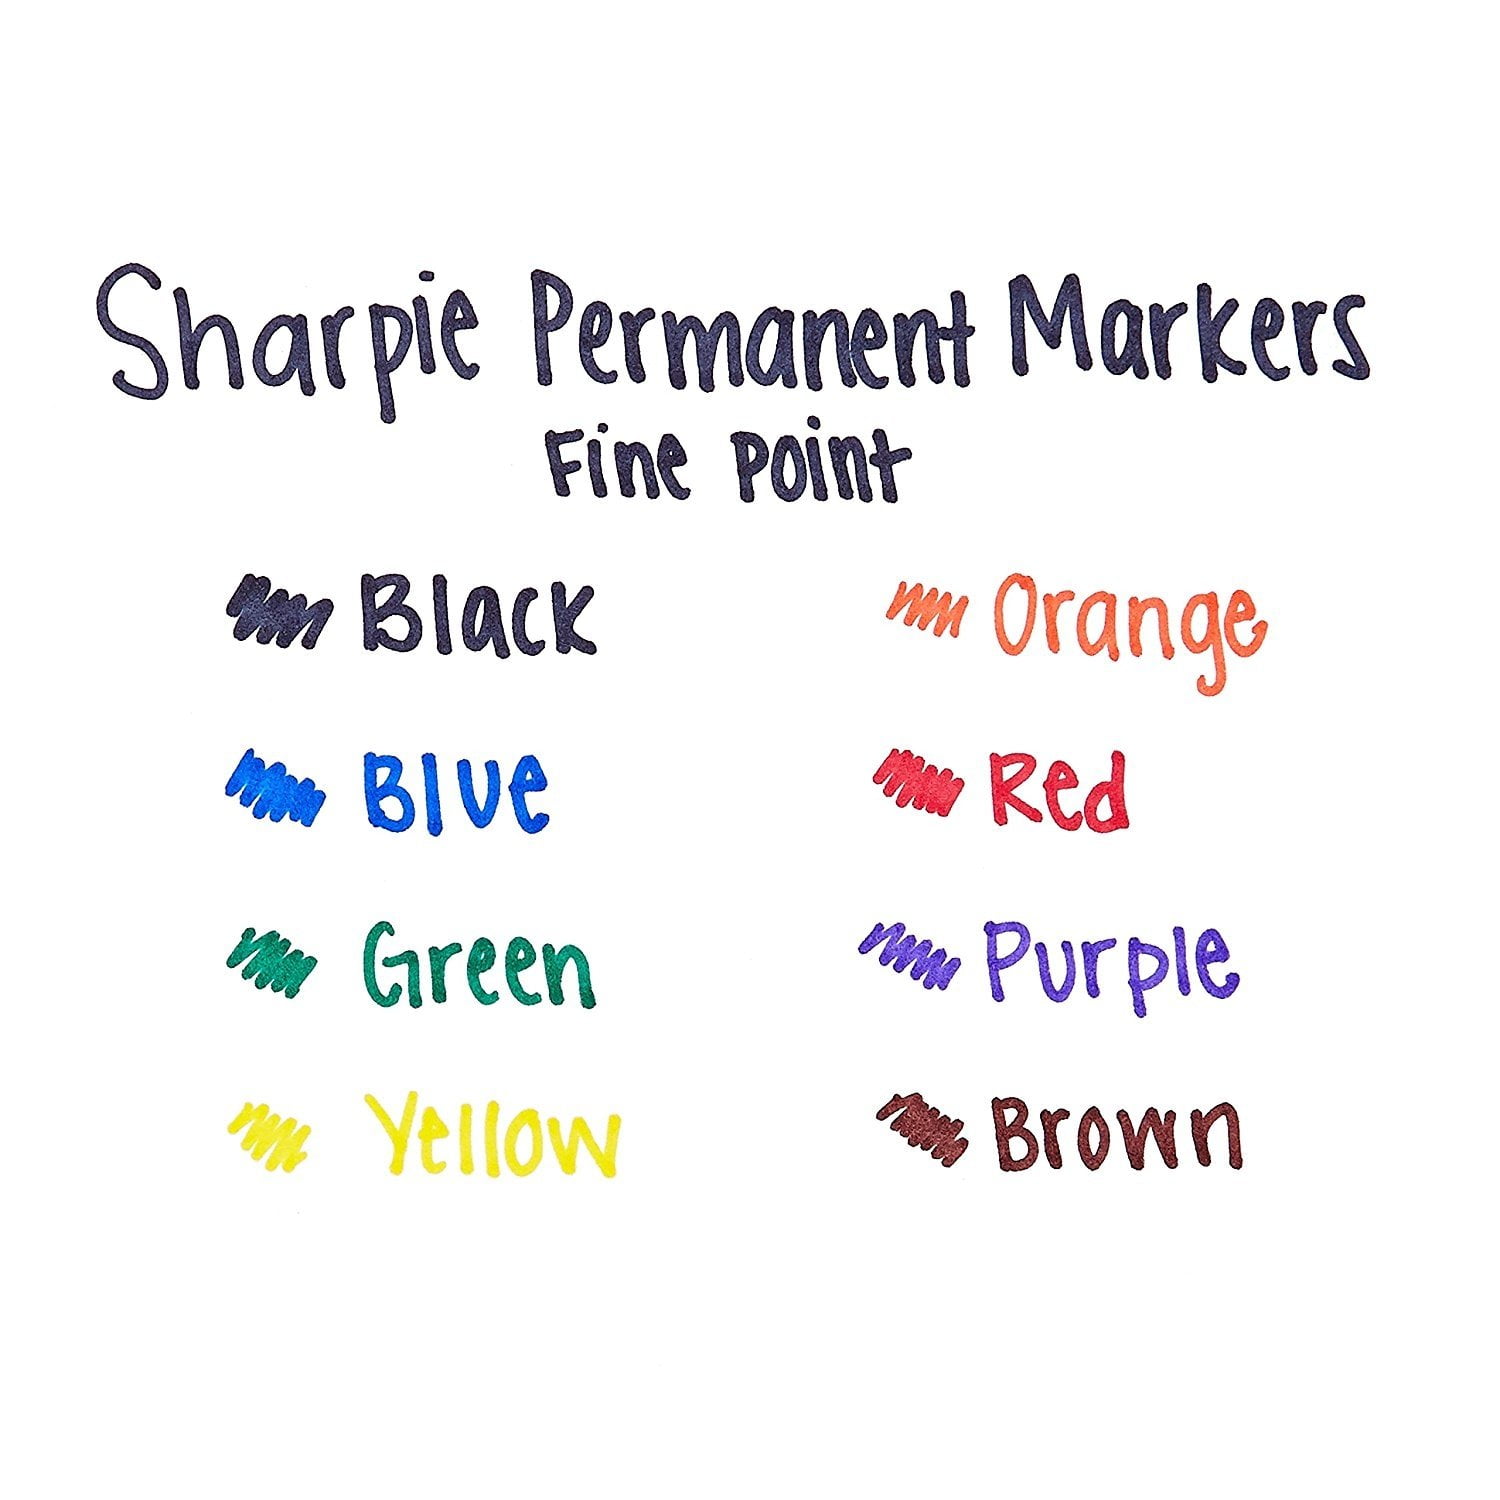 Sharpie Assorted Colors Fine Markers - 8 ct